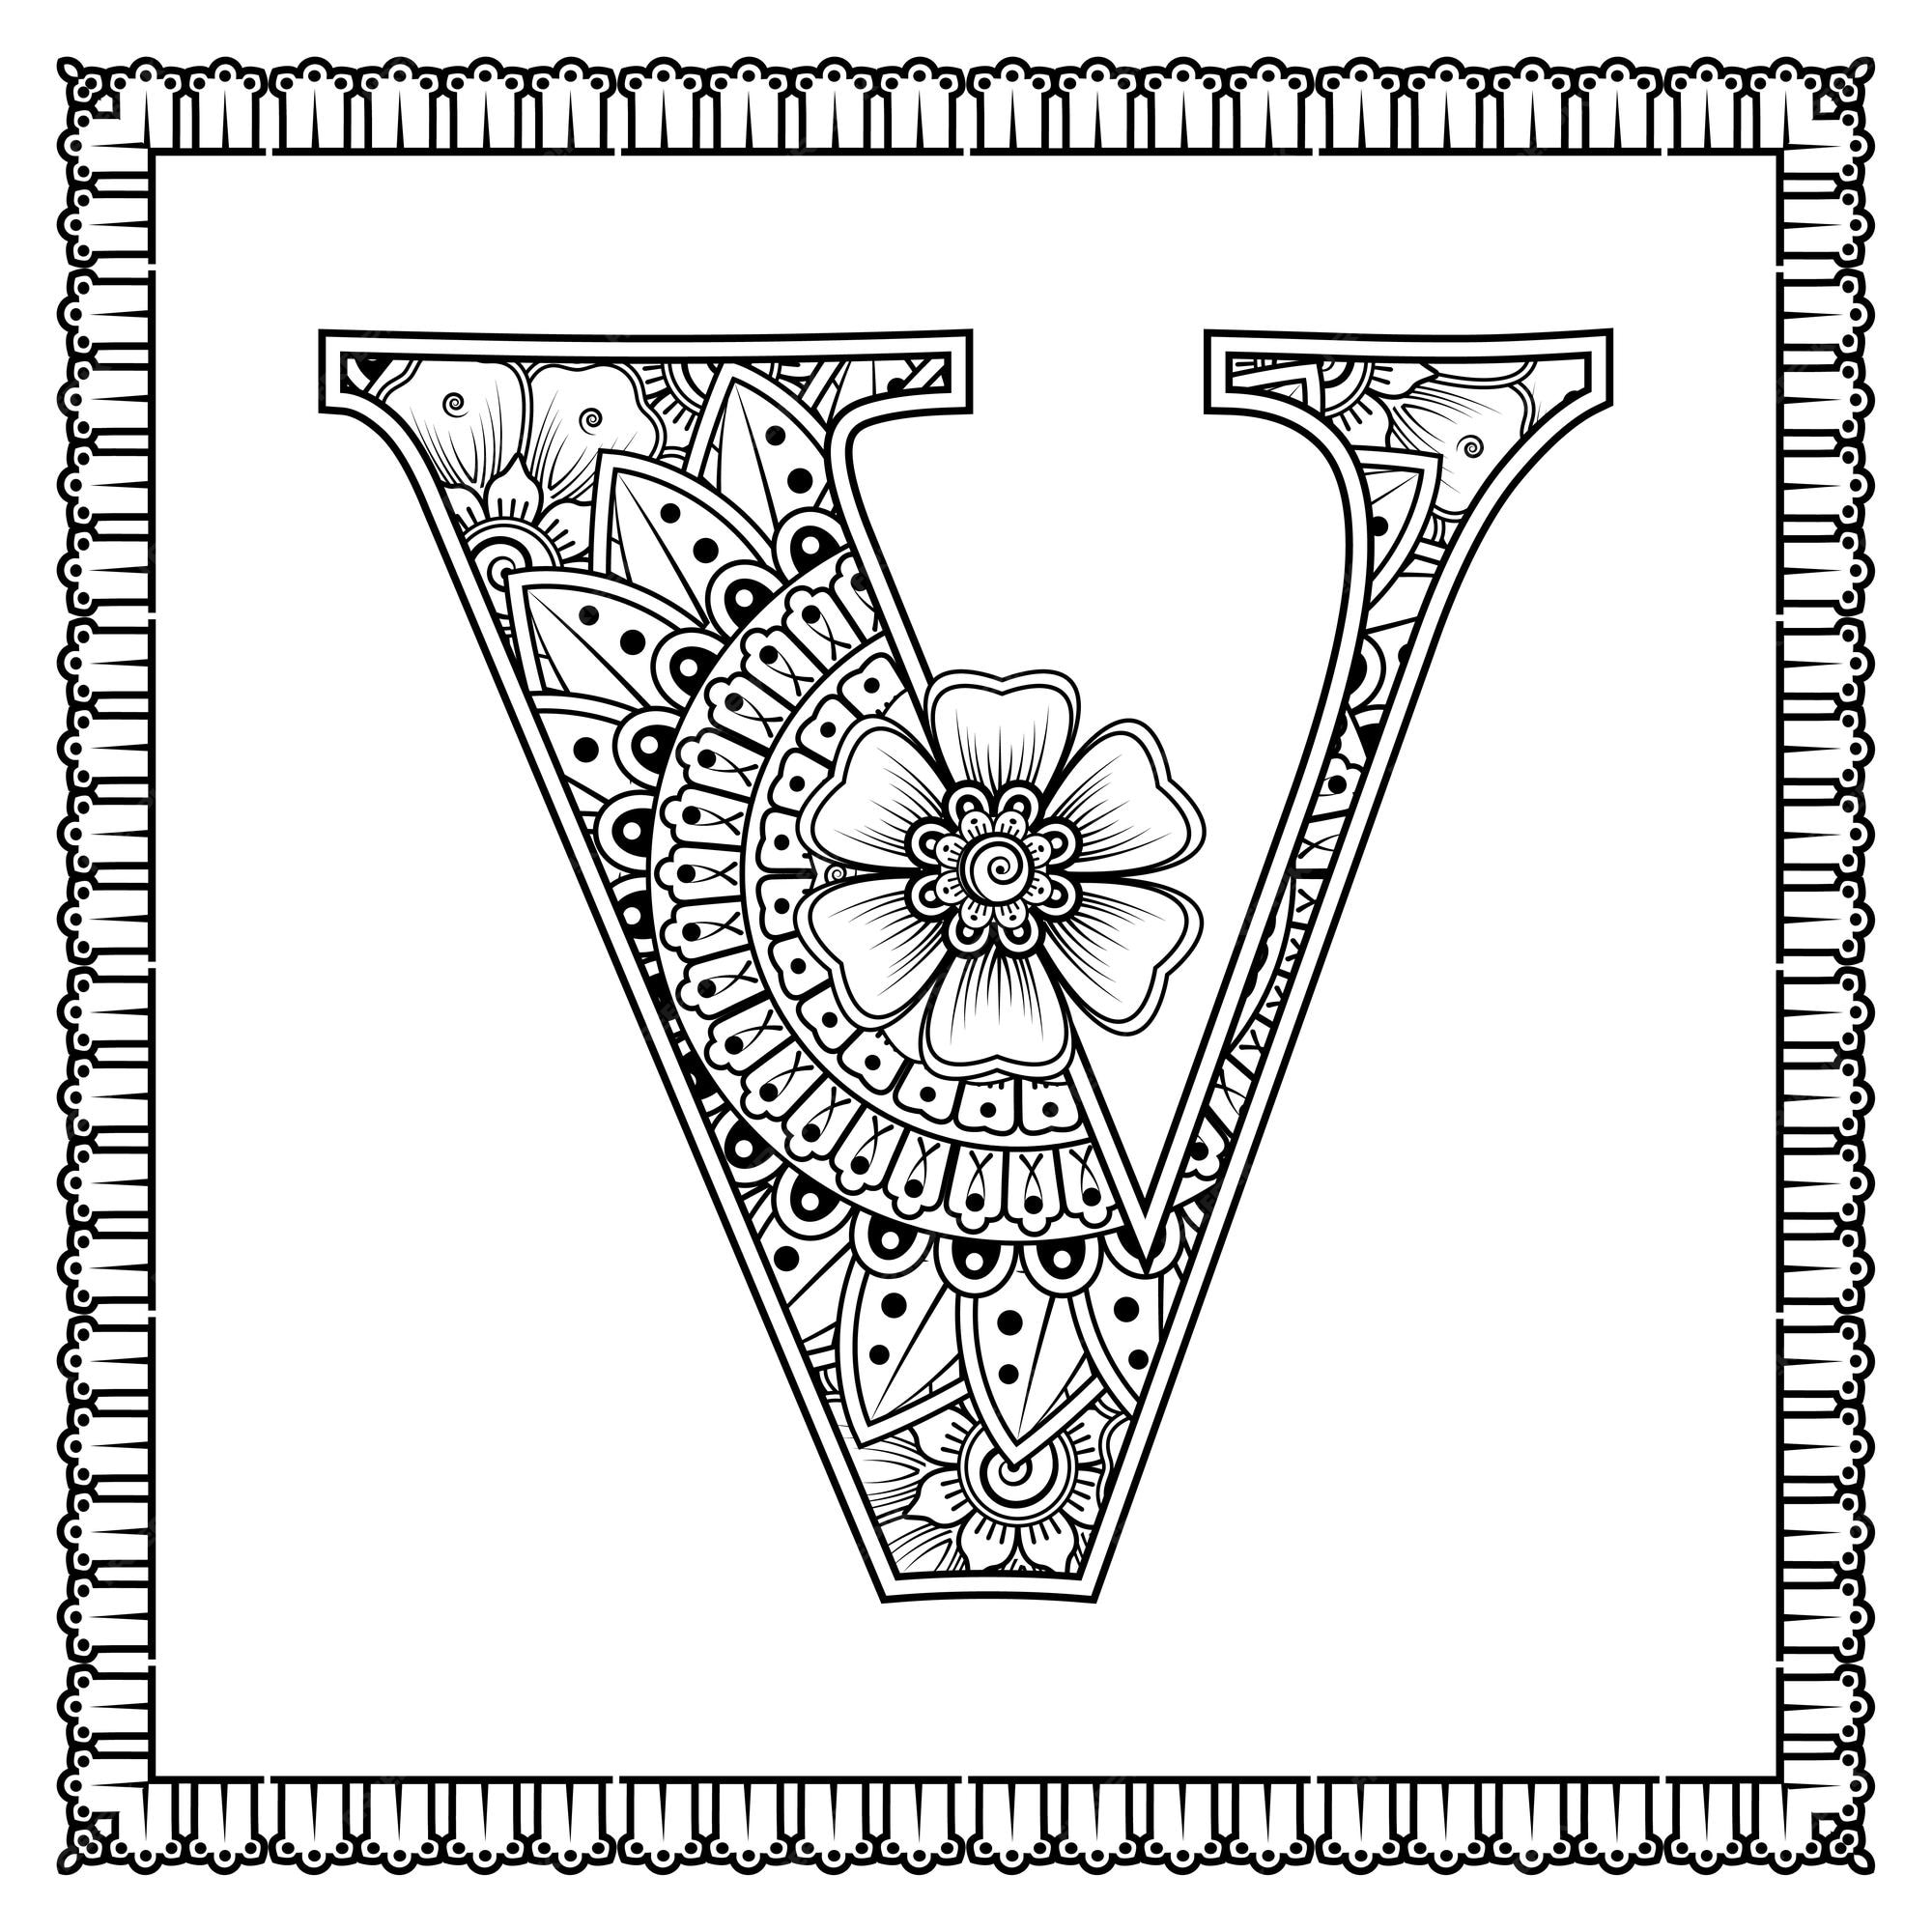 Premium vector letter v made of flowers in mehndi style coloring book page outline handdraw vector illustration